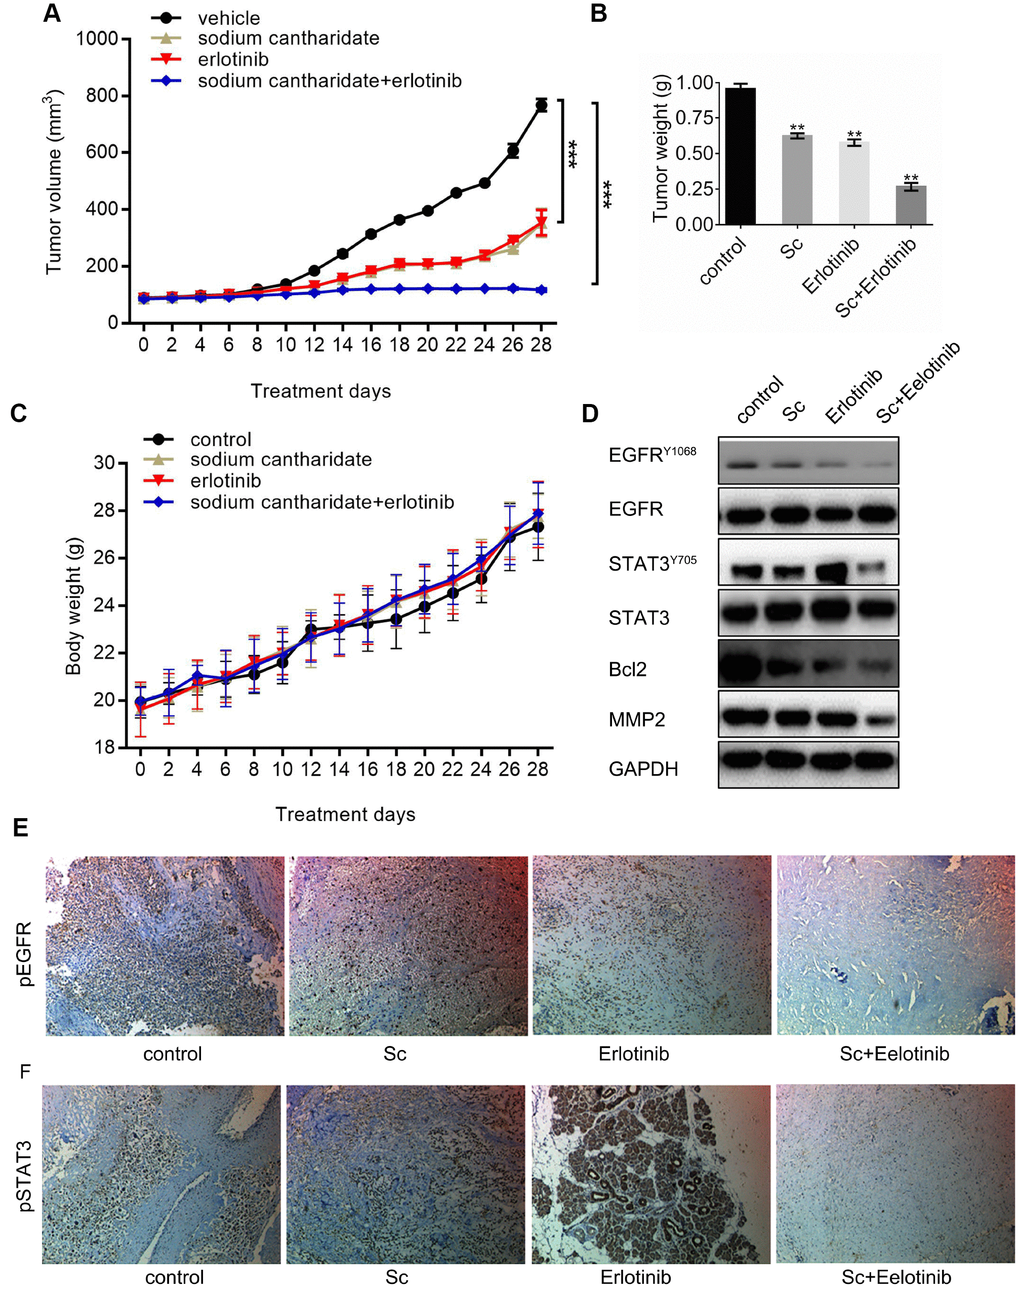 Combined treatment with sodium cantharidate and erlotinib enhances osteosarcoma growth suppression in nude mice. Nude mice were subcutaneously implanted with MG63 cells, randomly divided into four groups, and treated with saline (control), SC, erlotinib, or SC plus erlotinib for 4 weeks. (A) Mean tumor volumes in each experimental group. (B) Tumor wet weights at sacrifice (day 28 post-inoculation). (C) Body weight measurements. (D) Western blot analysis of phospho-EGFR, phospho-STAT3, Bcl-2, and MMP2 in excised tumor tissues. (E) Phospho-EGFR and (F) phosphor-STAT3 detection thorough immunohistochemistry in excised xenografts. Magnification, 100x. Sc, sodium cantharidate; Er, erlotinib.